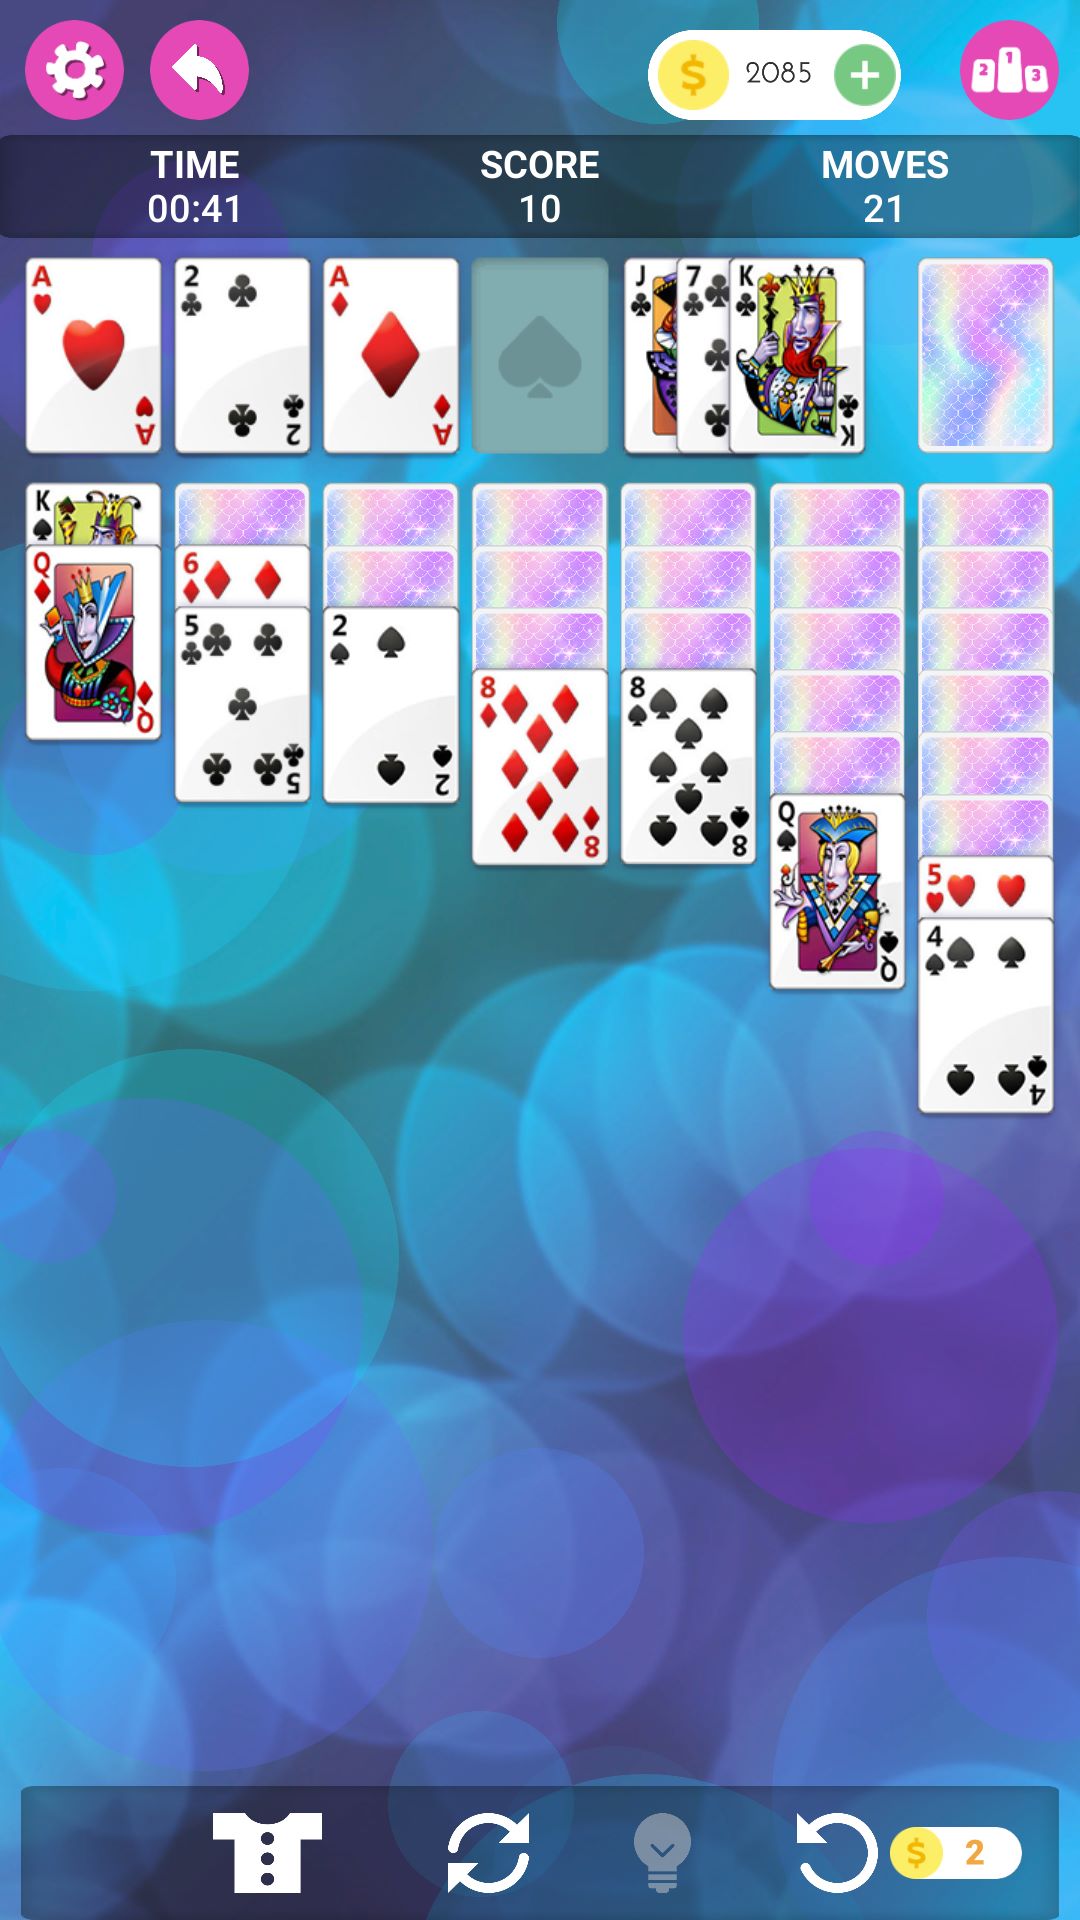 Solitaire - Classic Card Games For Kindle Fire Free - Microsoft Apps